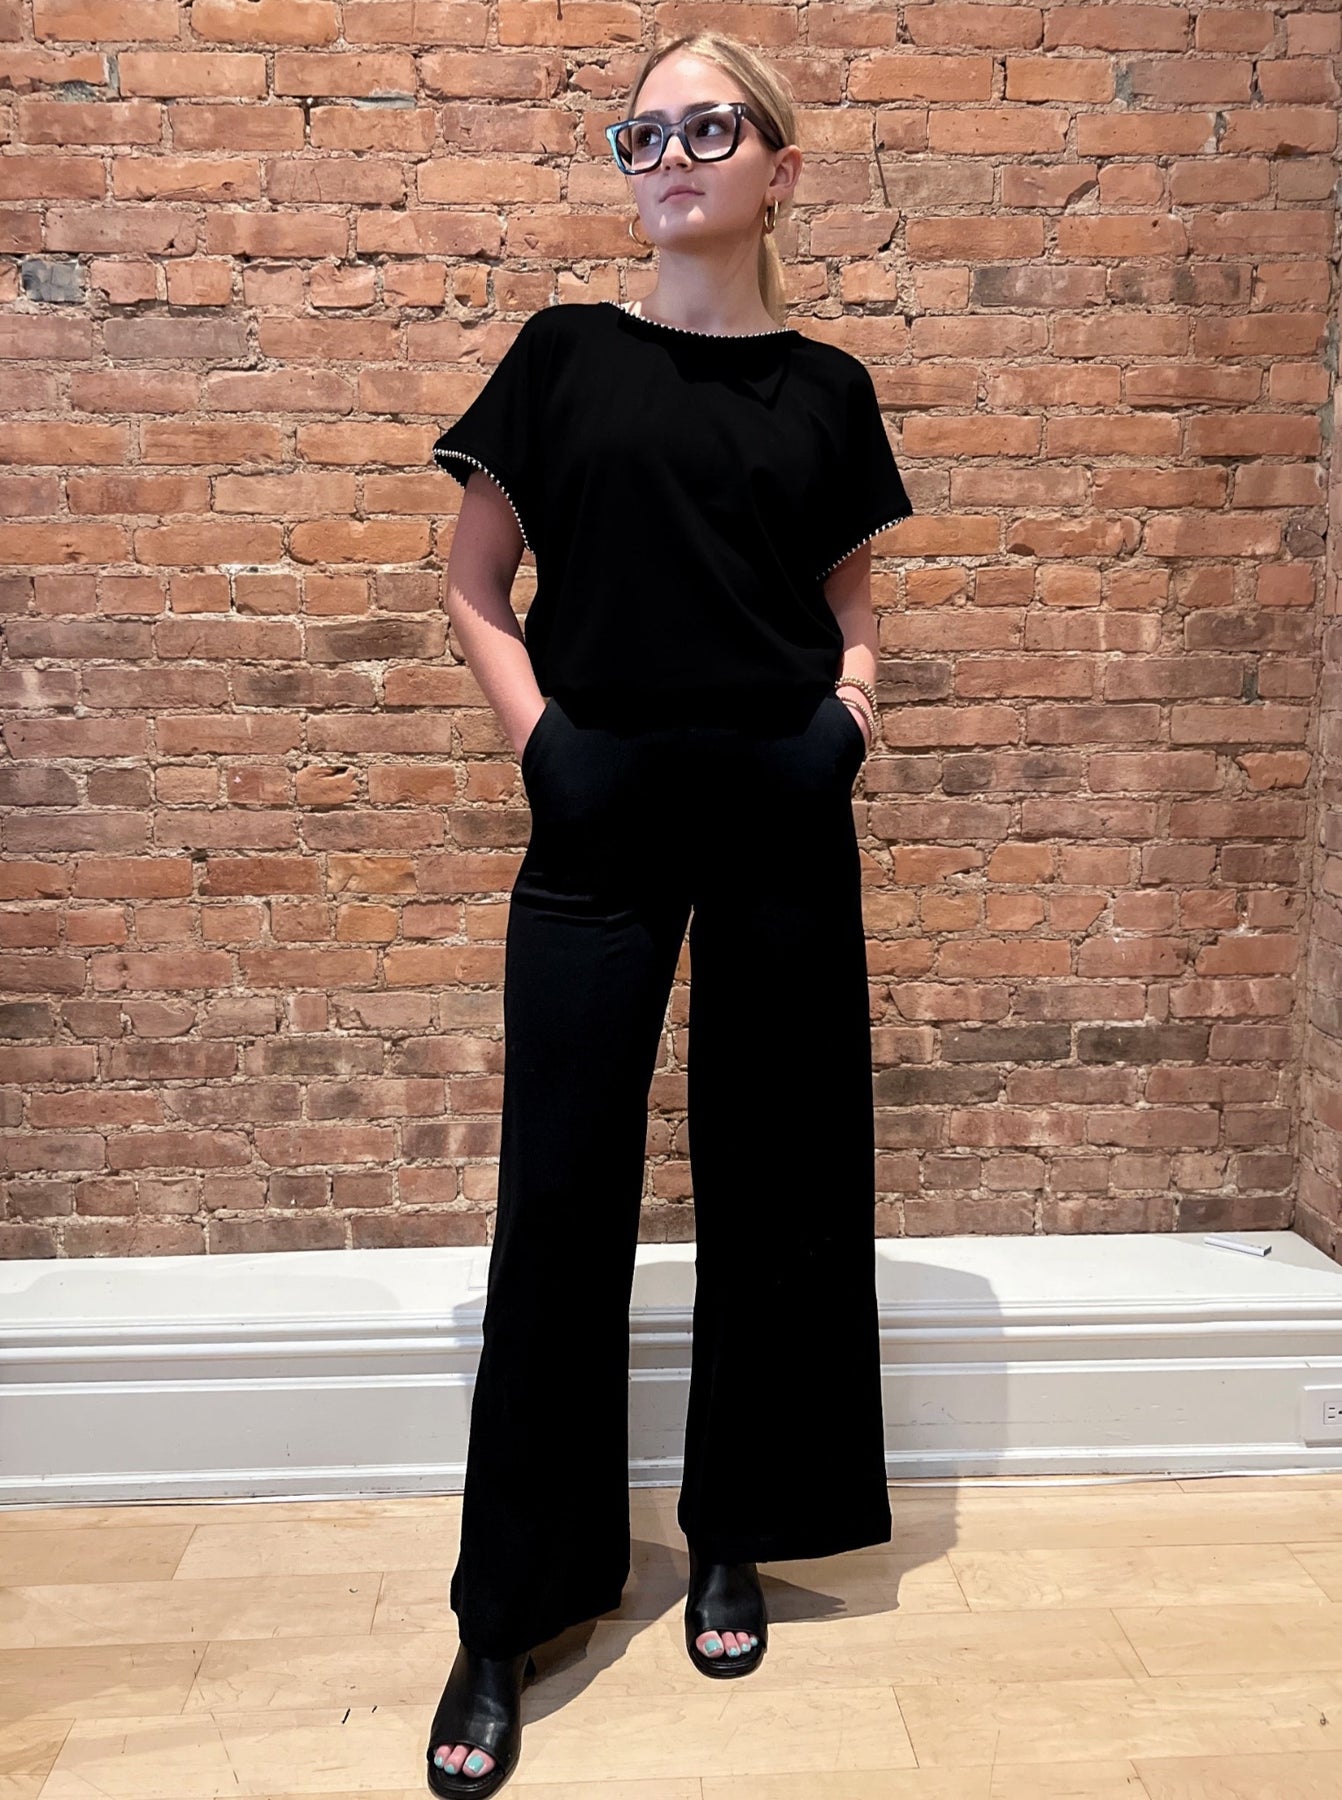 Best Black Ankle Pants - The Hudson – DuetteNYC